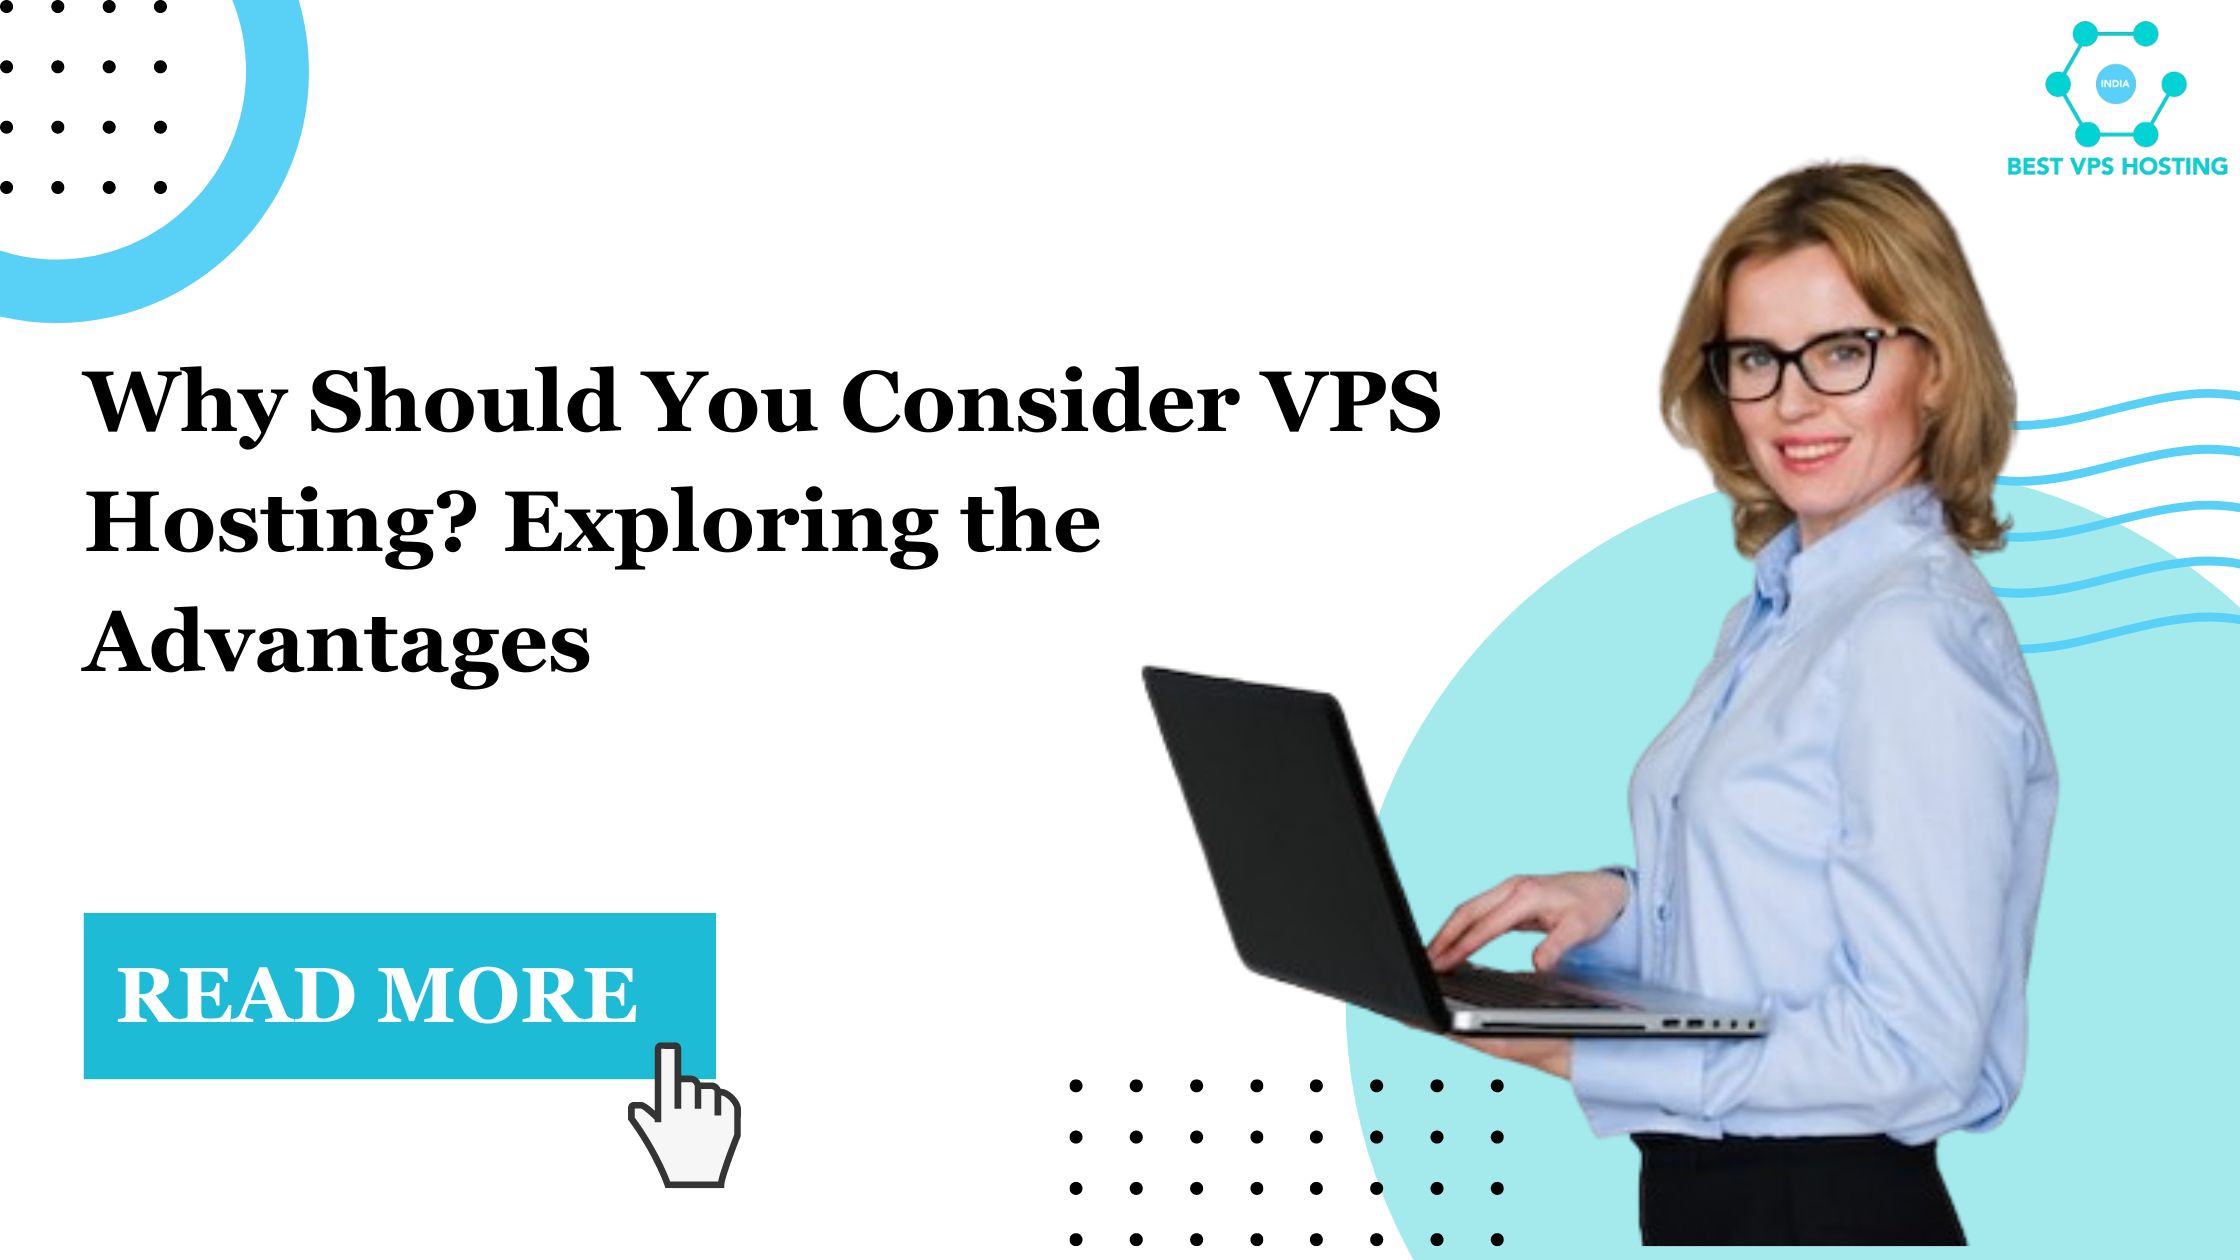 Why Should You Consider VPS Hosting? Exploring the Advantages